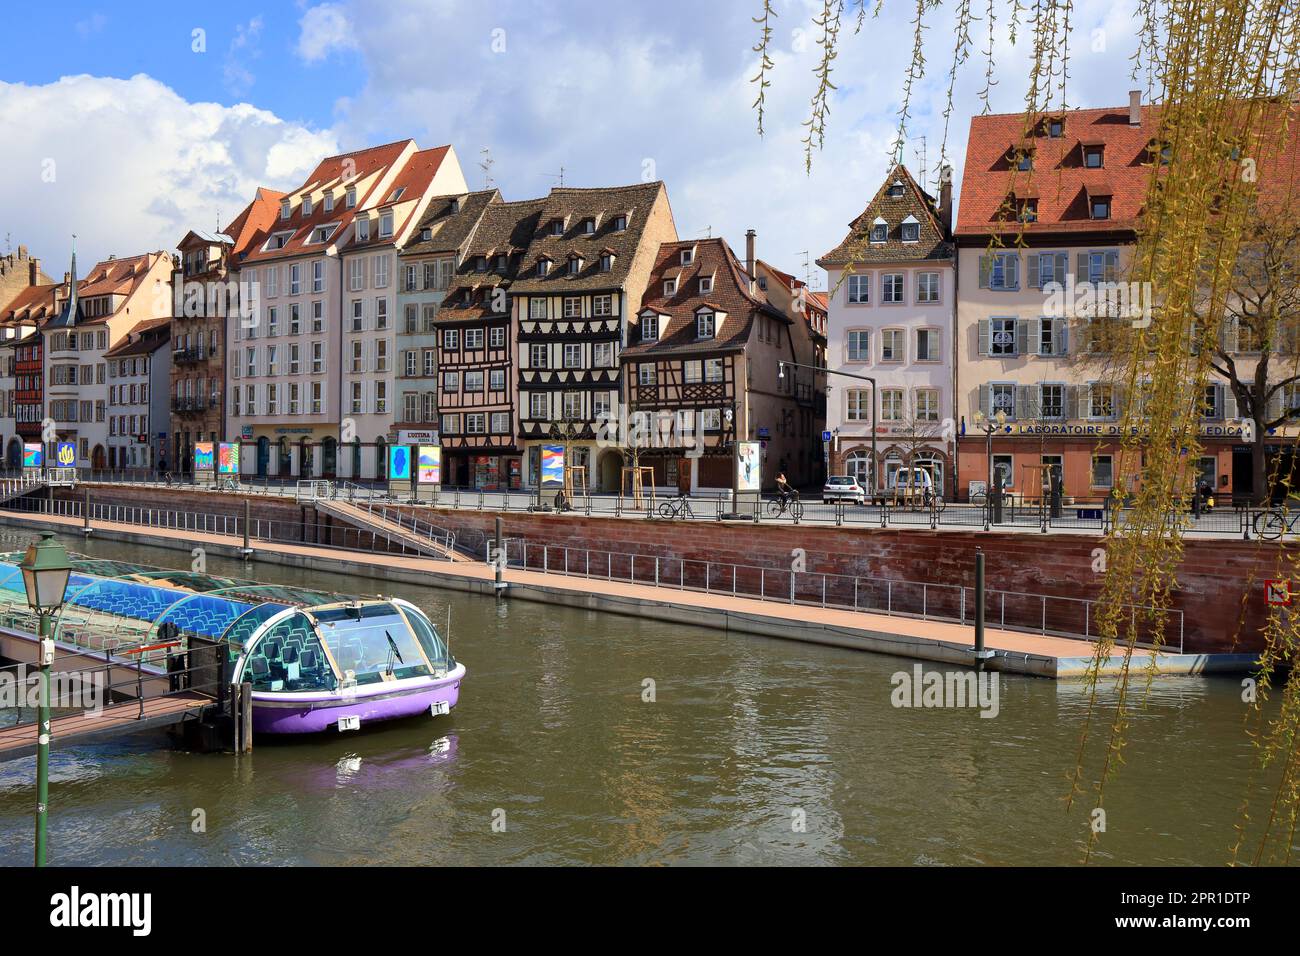 View of buildings and houses along Quai des Bateliers on the Ill River in Grande-Île de Strasbourg, France. Stock Photo